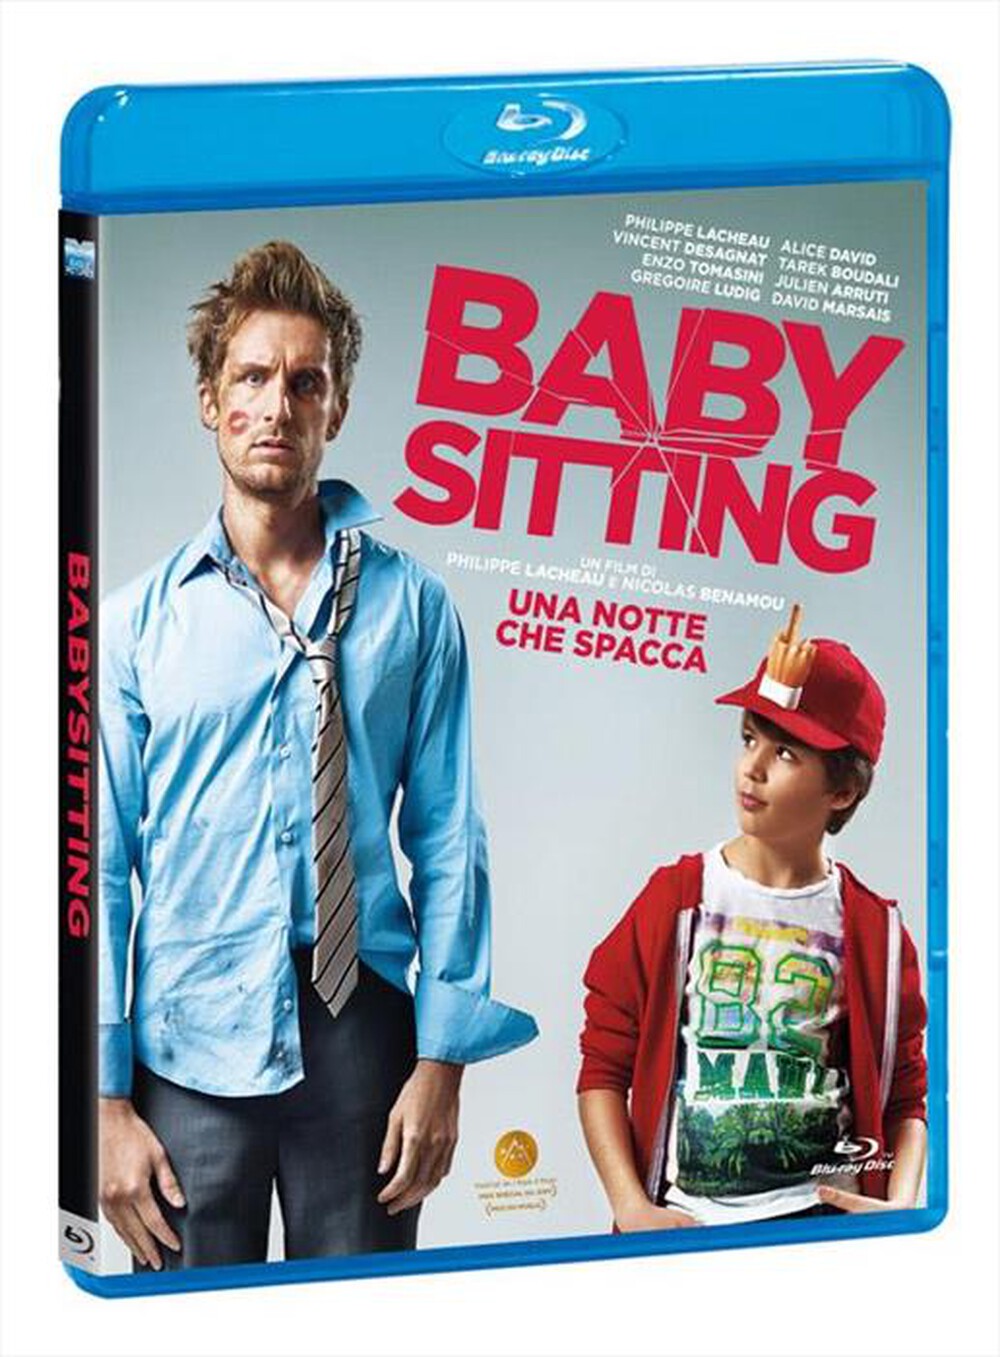 "EAGLE PICTURES - Babysitting - Una Notte Che Spacca"